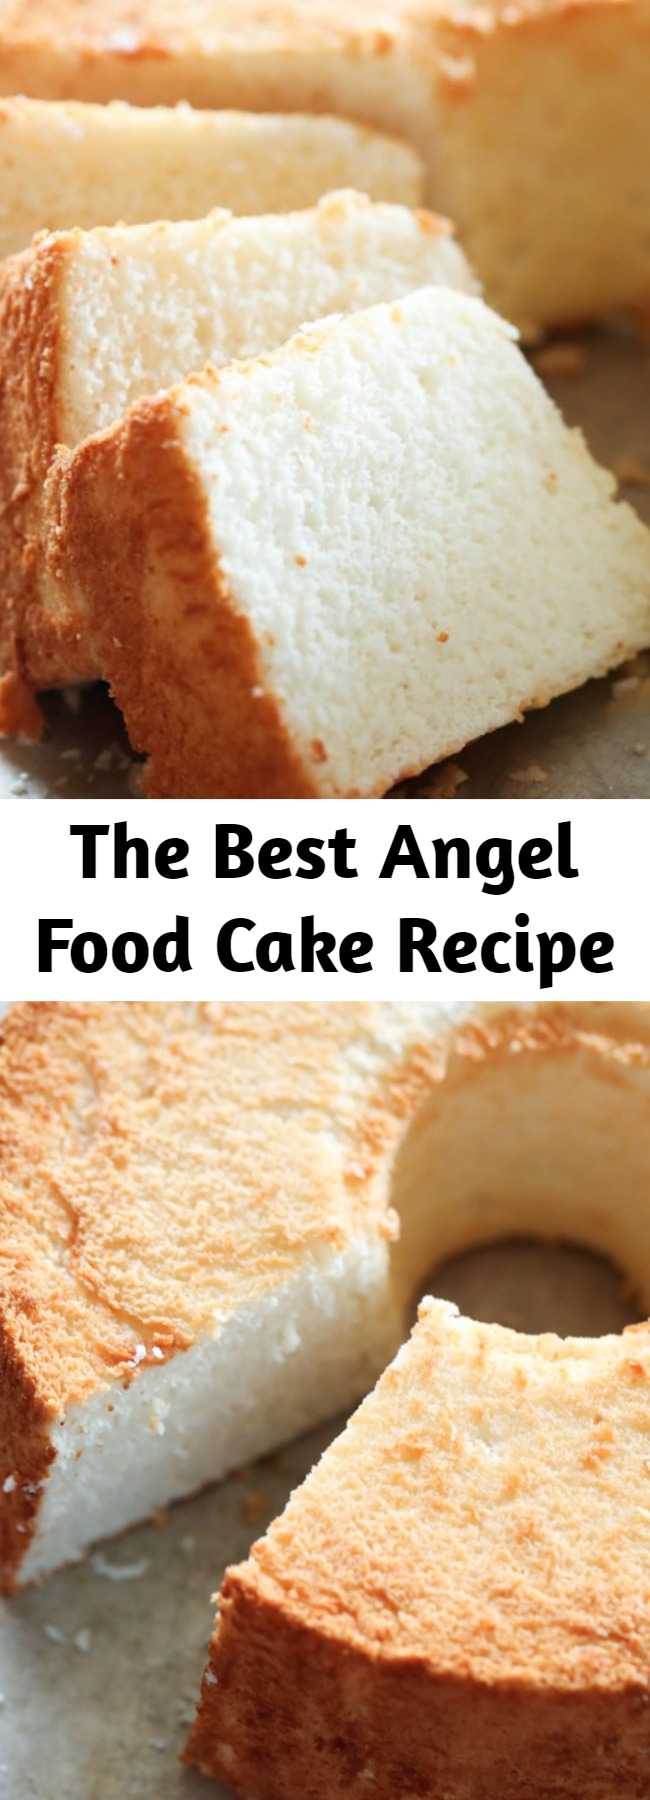 The Best Angel Food Cake Recipe - THE BEST Angel Food Cake from scratch! This cake has the most perfect texture and flavor. Once you make this, it will become your new favorite!